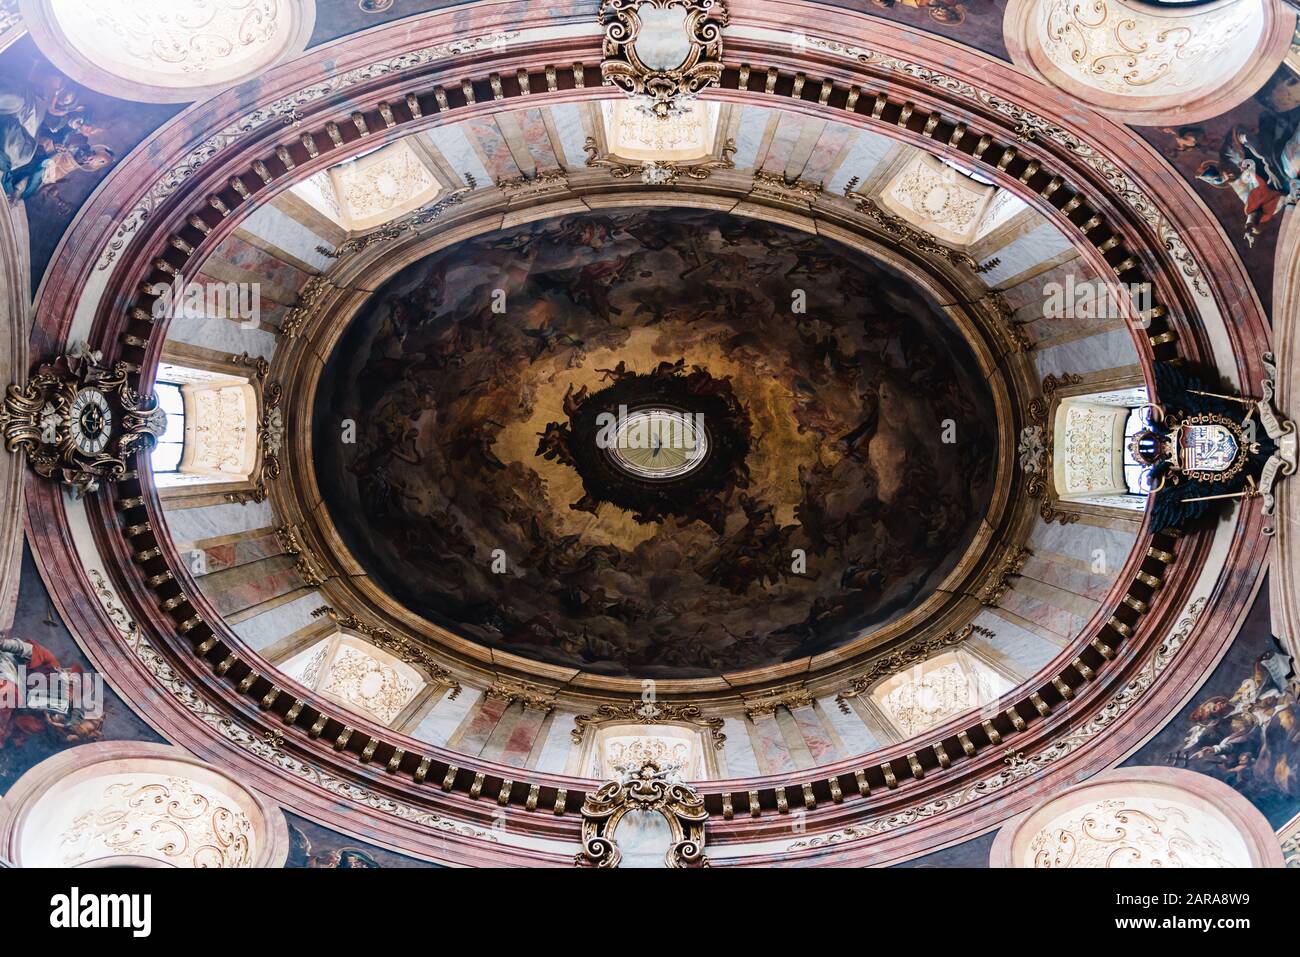 Vienna, Austria - August 16, 2017: Directly below view of the dome of St Peter church. Stock Photo